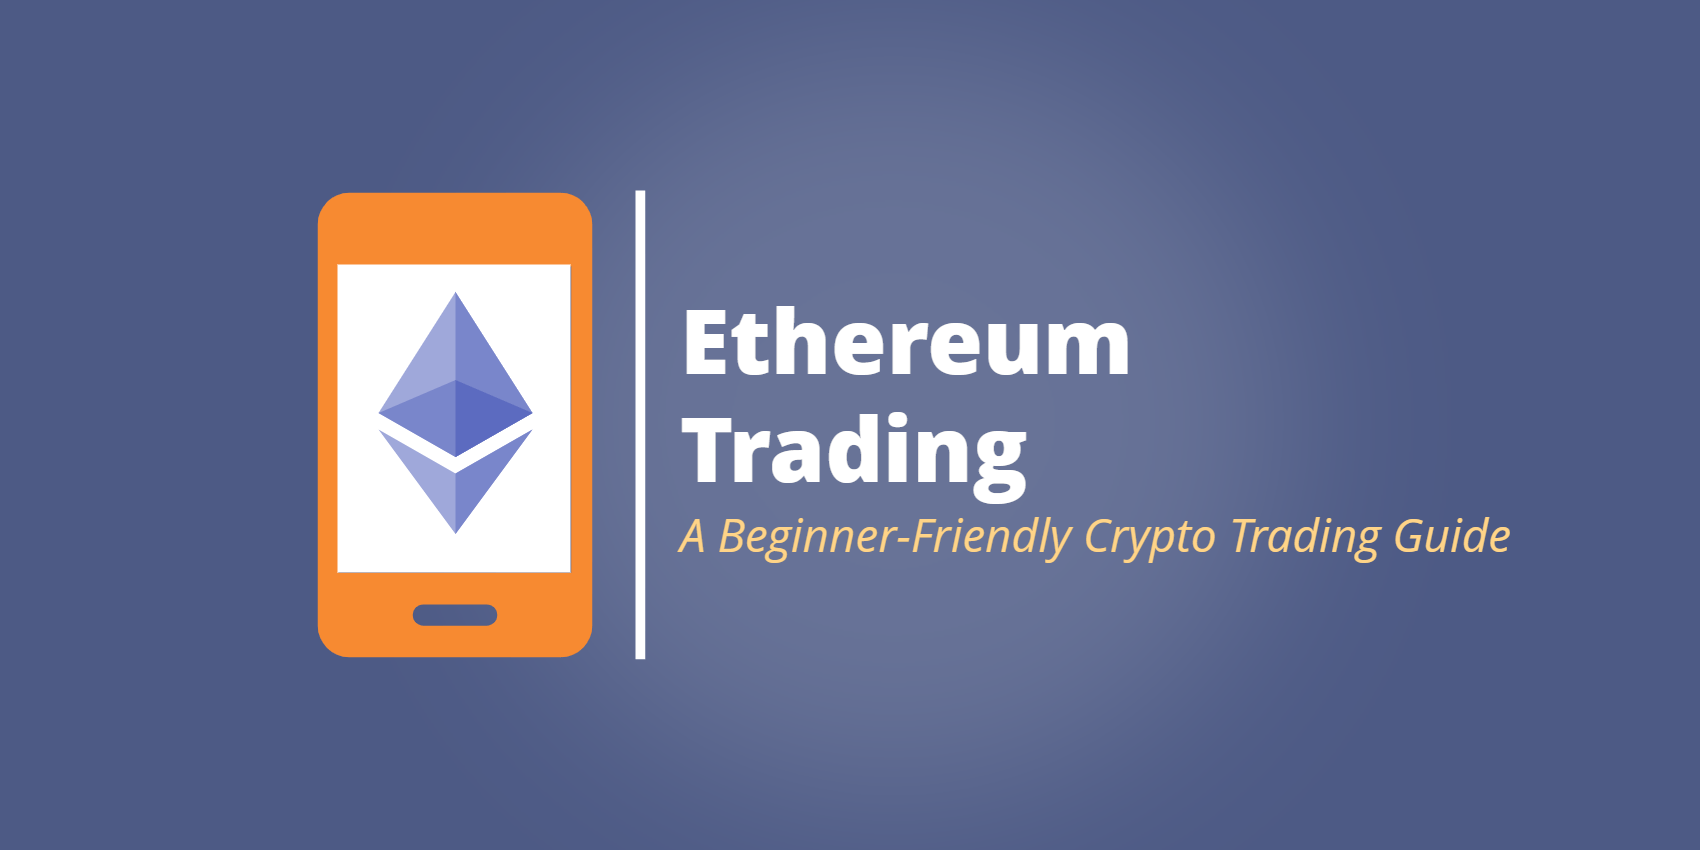 Guide to ethereum trading where can you bet online